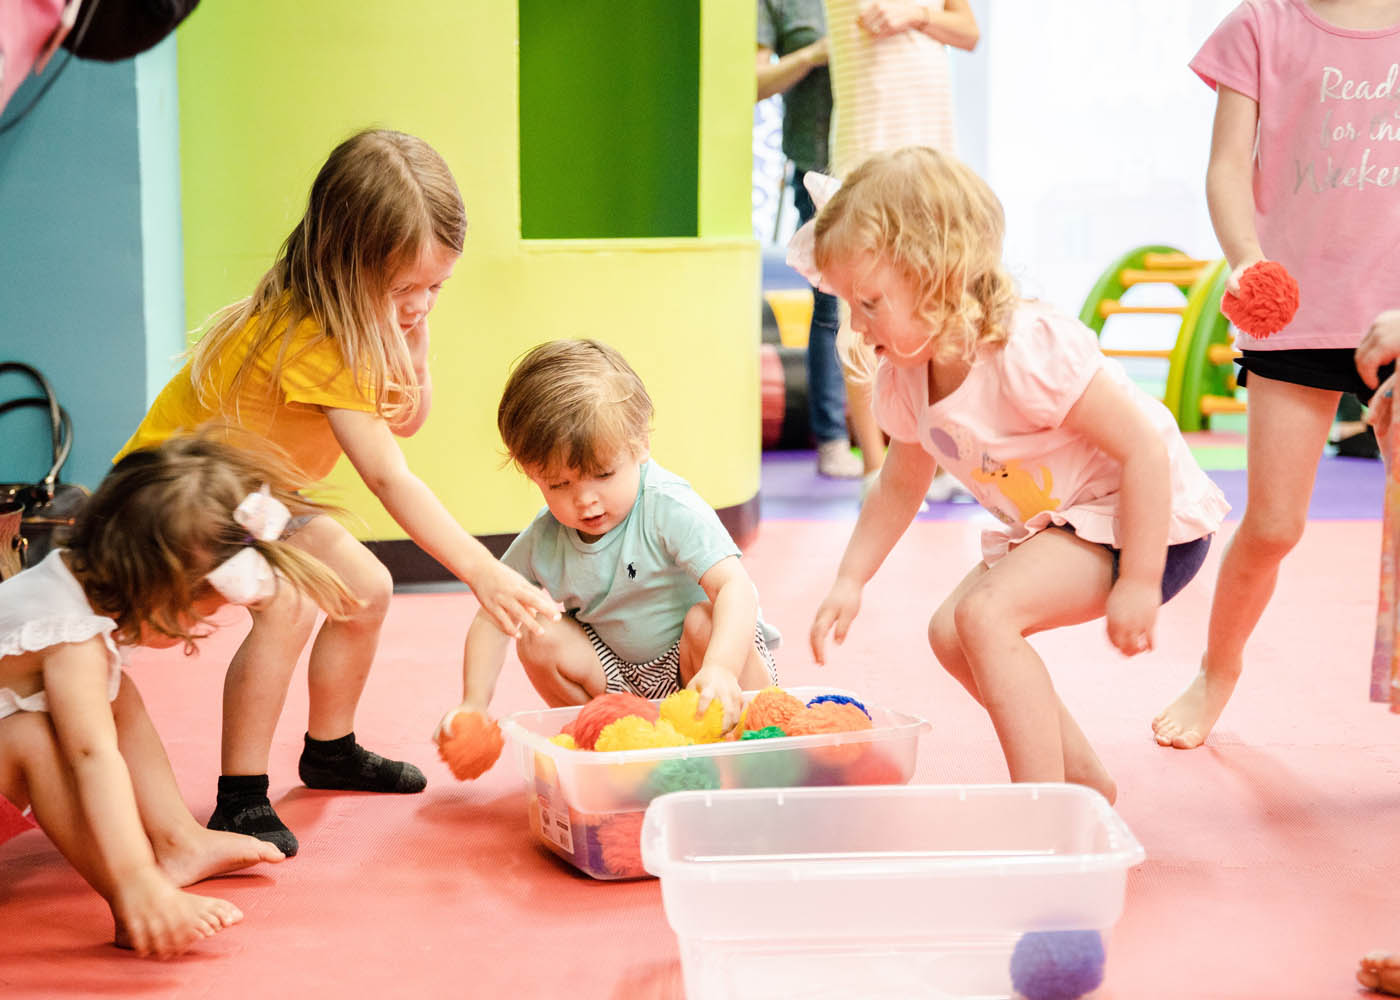 A mixed age group of boys and girls playing in Romp n' Roll's gym, contact us today for our childrens events in Midlothian, VA.